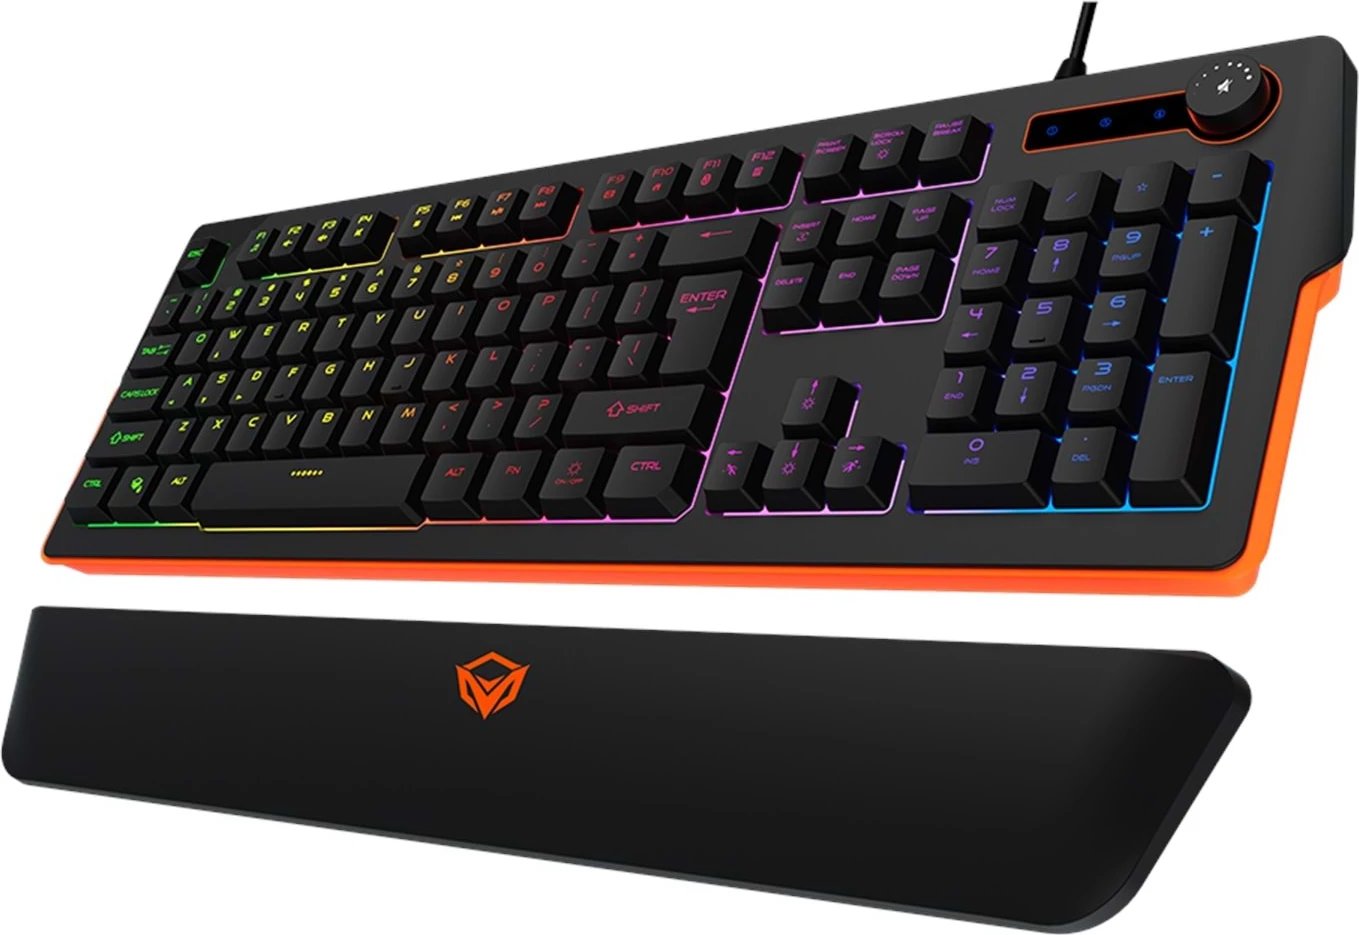  RGB Magnetic Wrist Rest Keyboard for Gaming